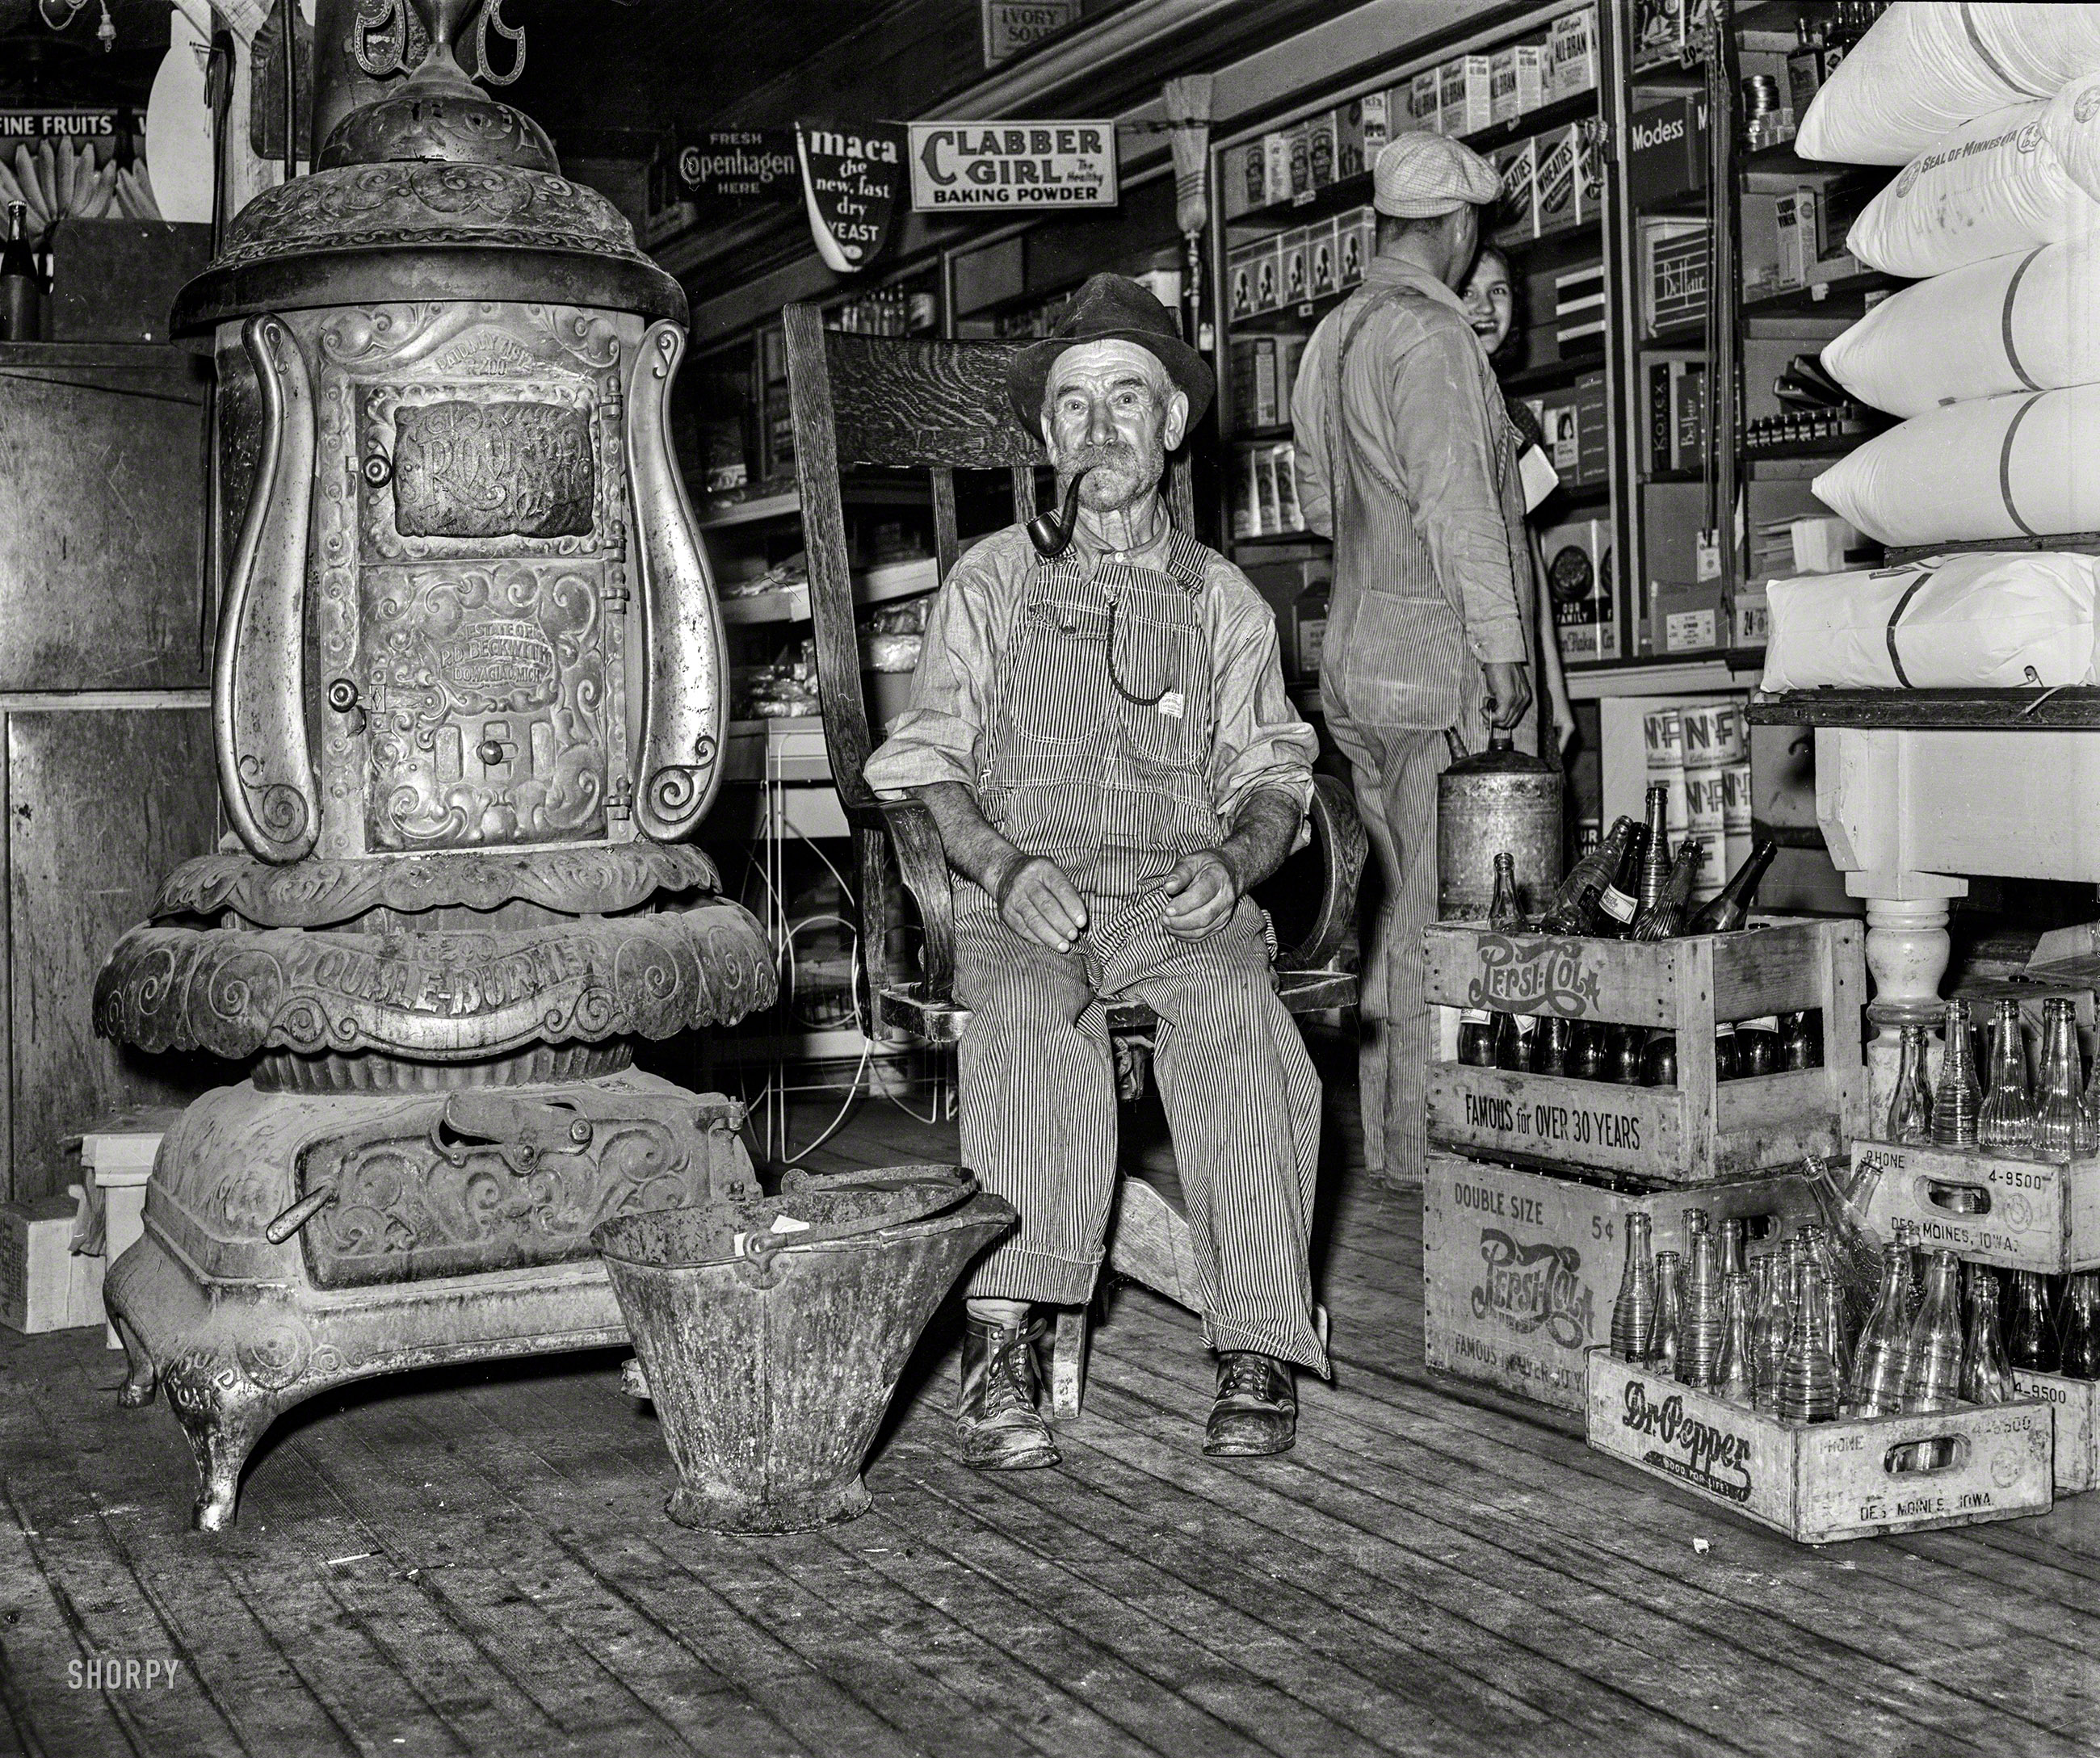 October 1939. "Farmer sits near the stove. General store in Lamoille, Iowa." Photo by Arthur Rothstein for the Farm Security Administration. View full size.